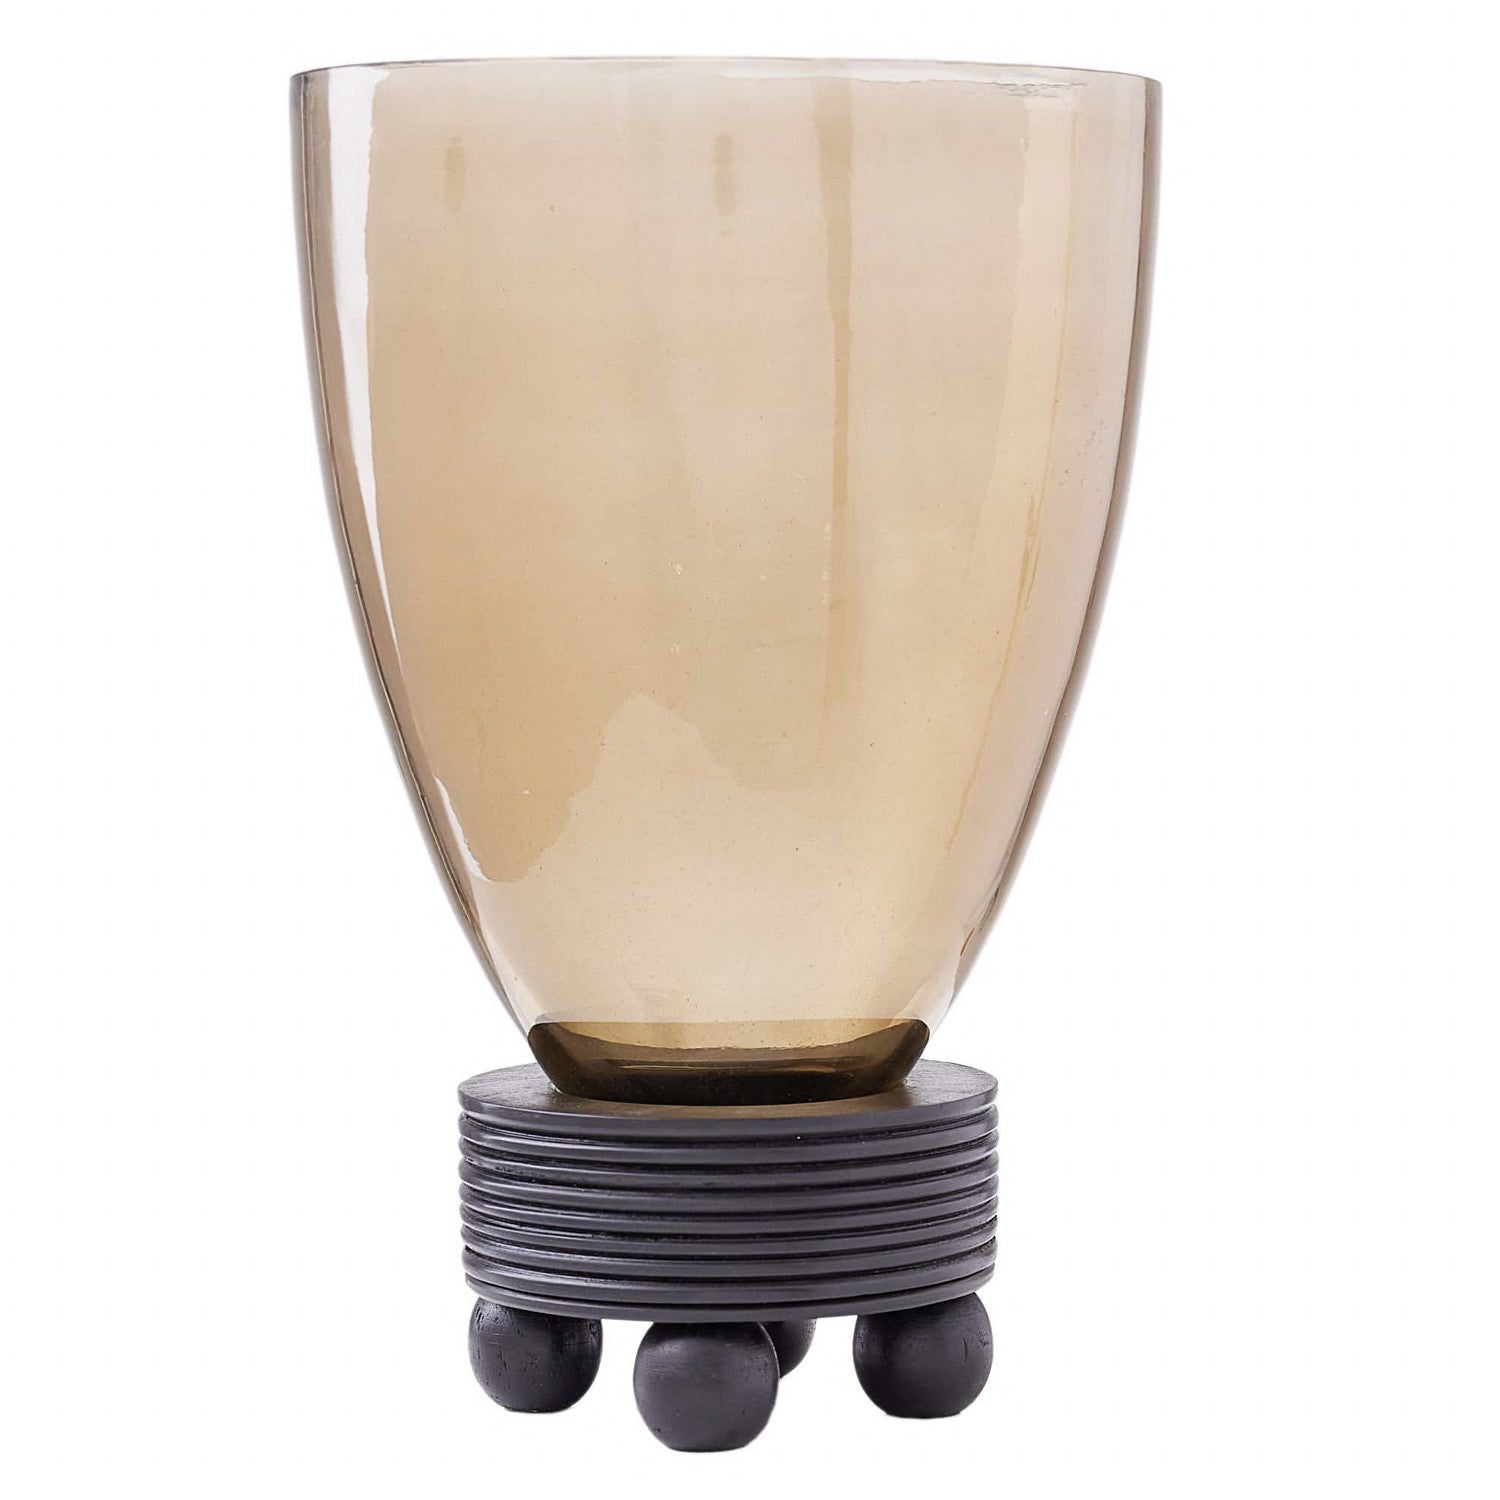 Vase from the Wendell collection in Smoke finish